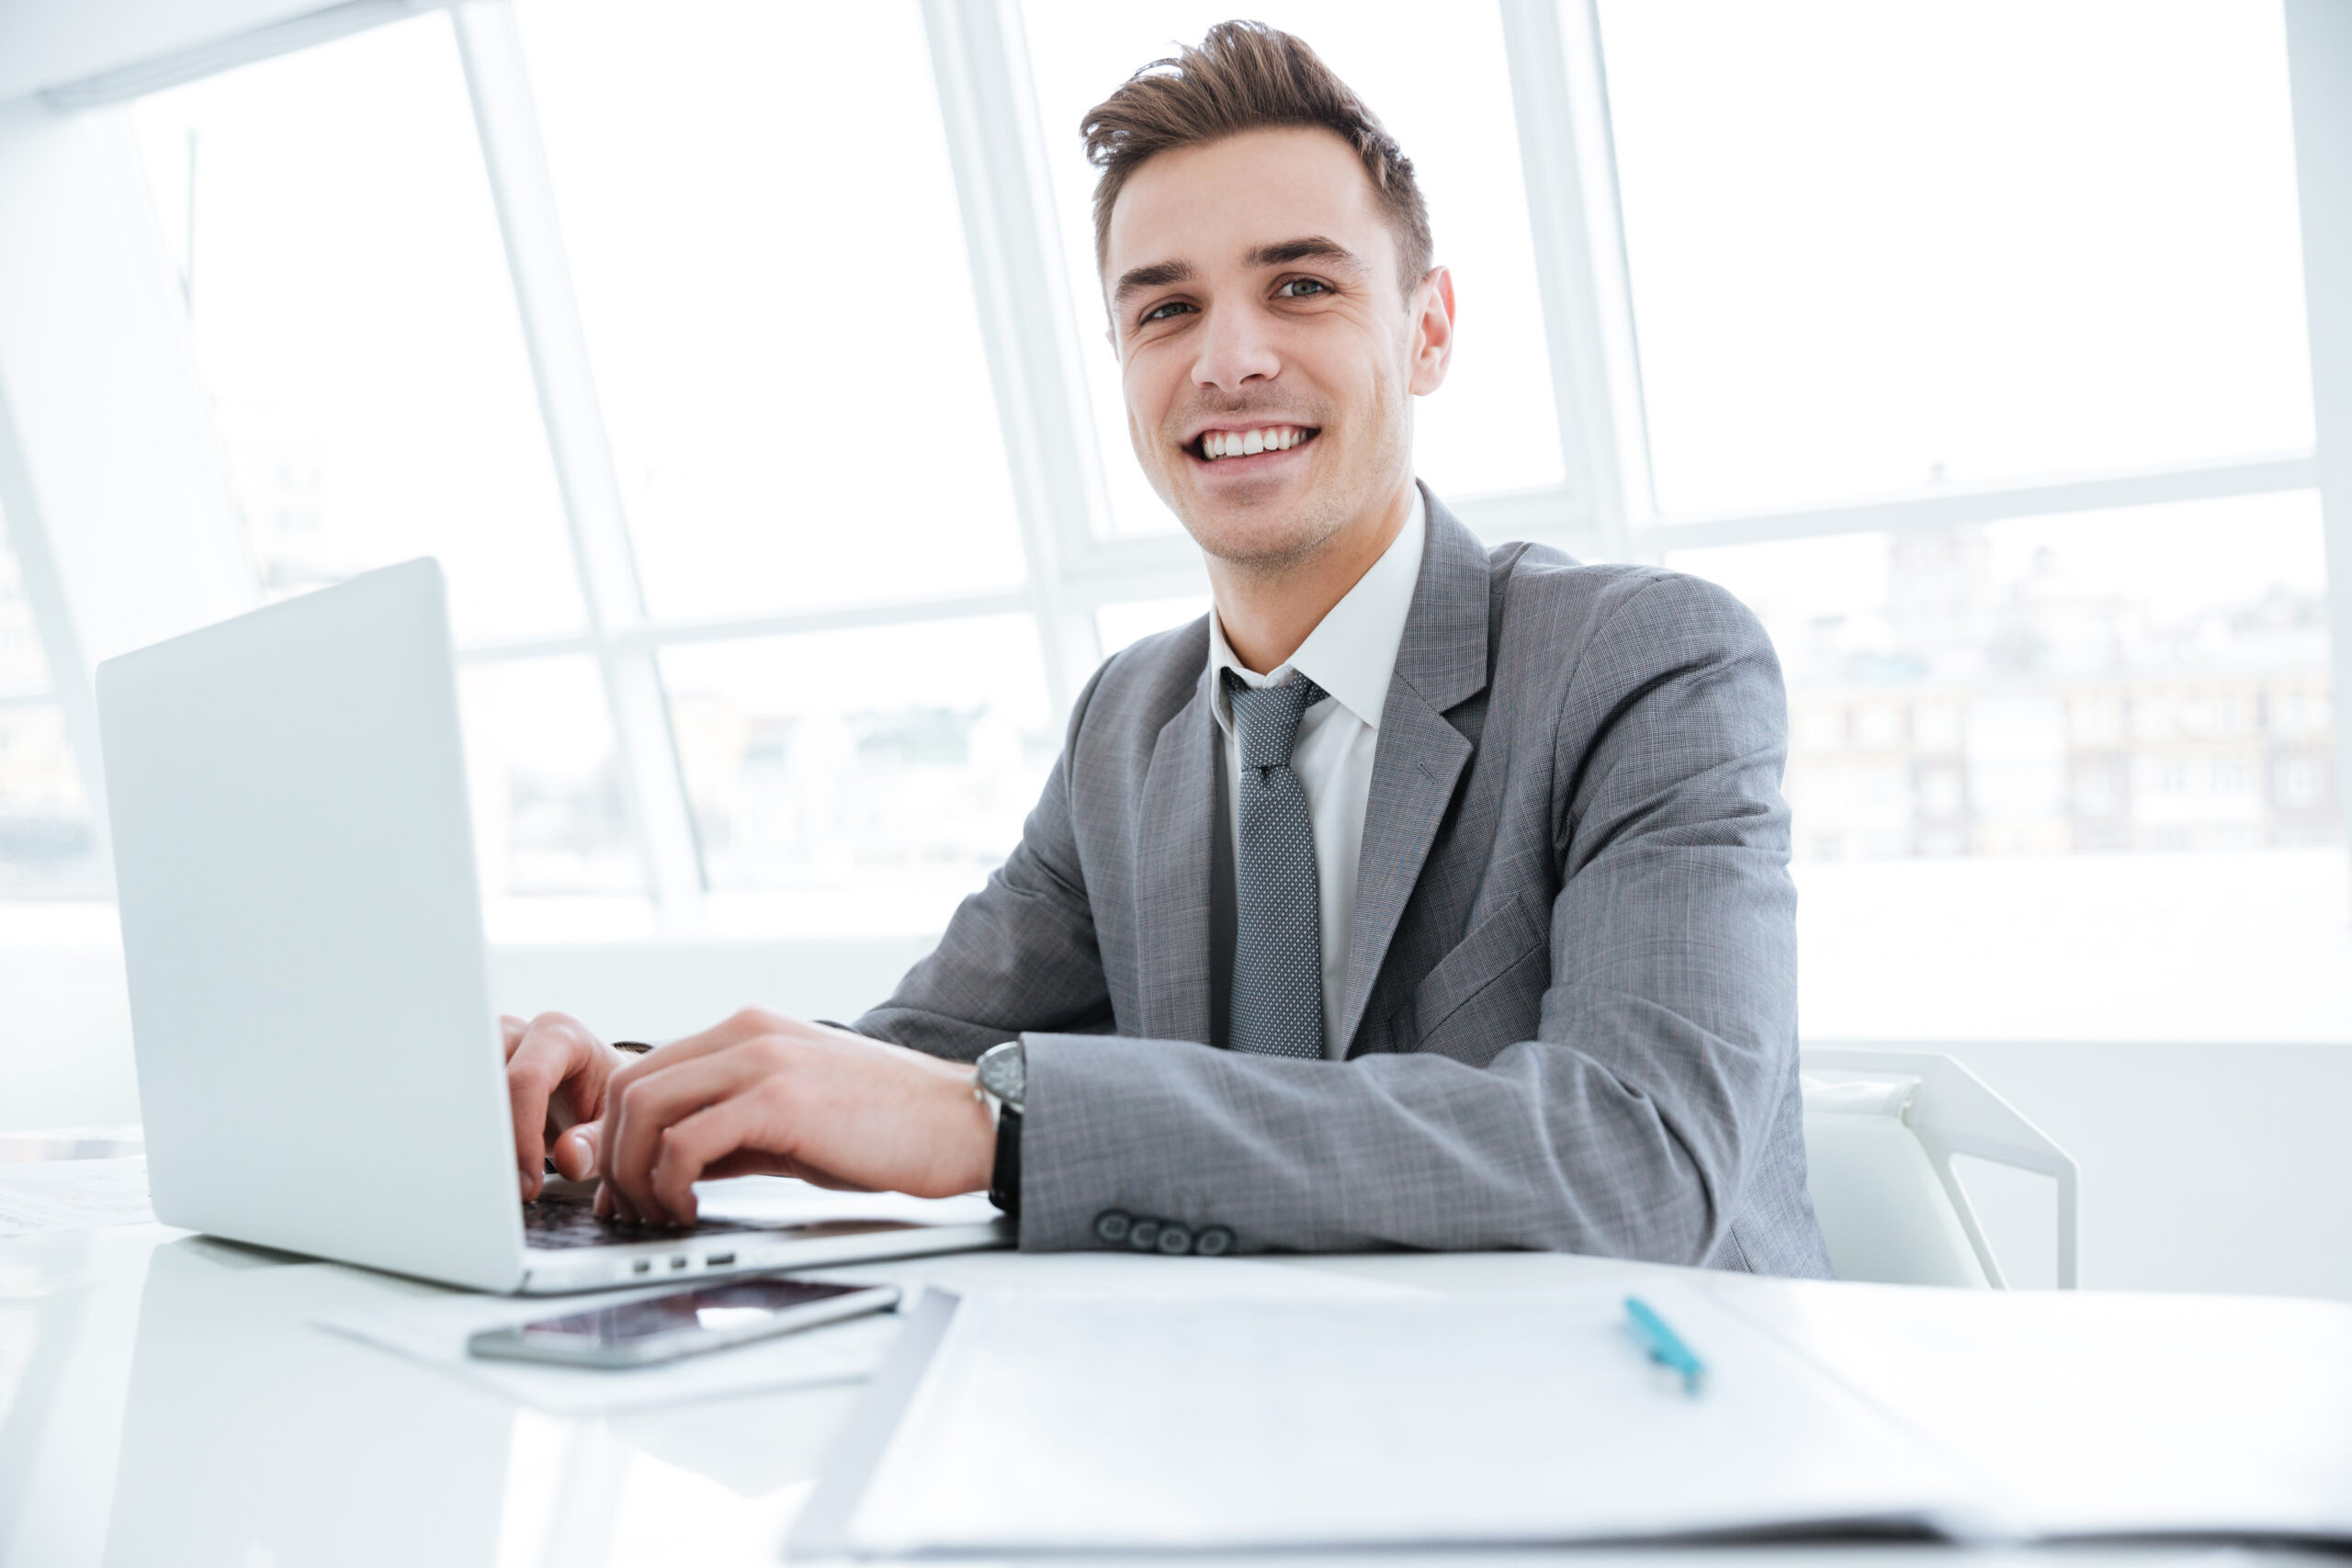 Smiling male marketing learner in business suit typing on laptop